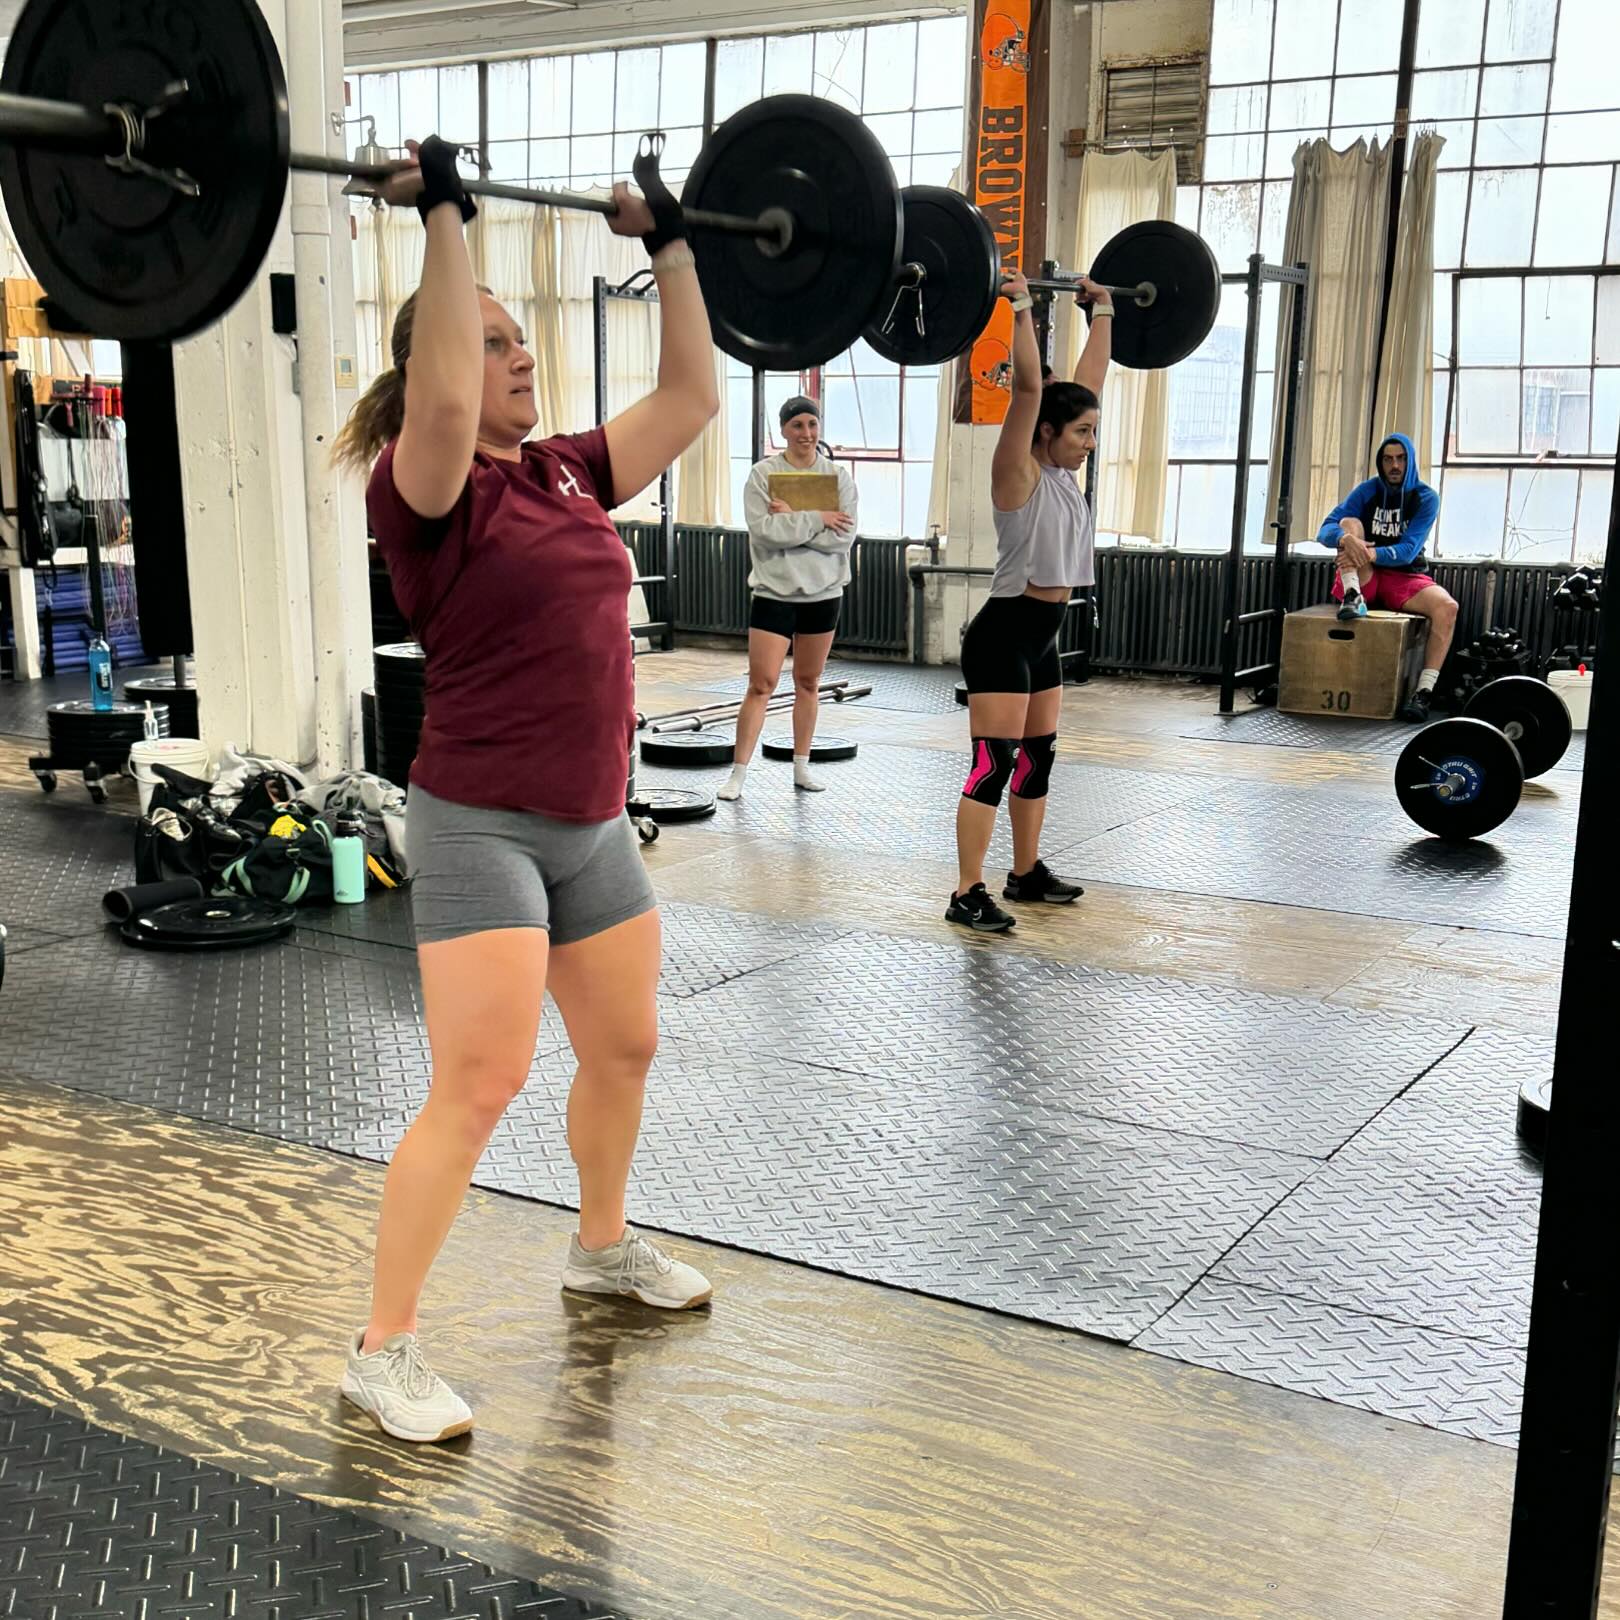 Wow 24.3 was intense!! All of our athletes are completely crushing it! Thrusters and rig push/pull movements are no joke 🥵 

 #BirdtownStrength #BirdtownStrong #FunctionalFitness #BeBetter #RedefiningStrength #TeamWorkMakesTheDreamWork #WeAreBirdtown #Lakewood #Ohio #LakewoodOhio #TheOpen2024